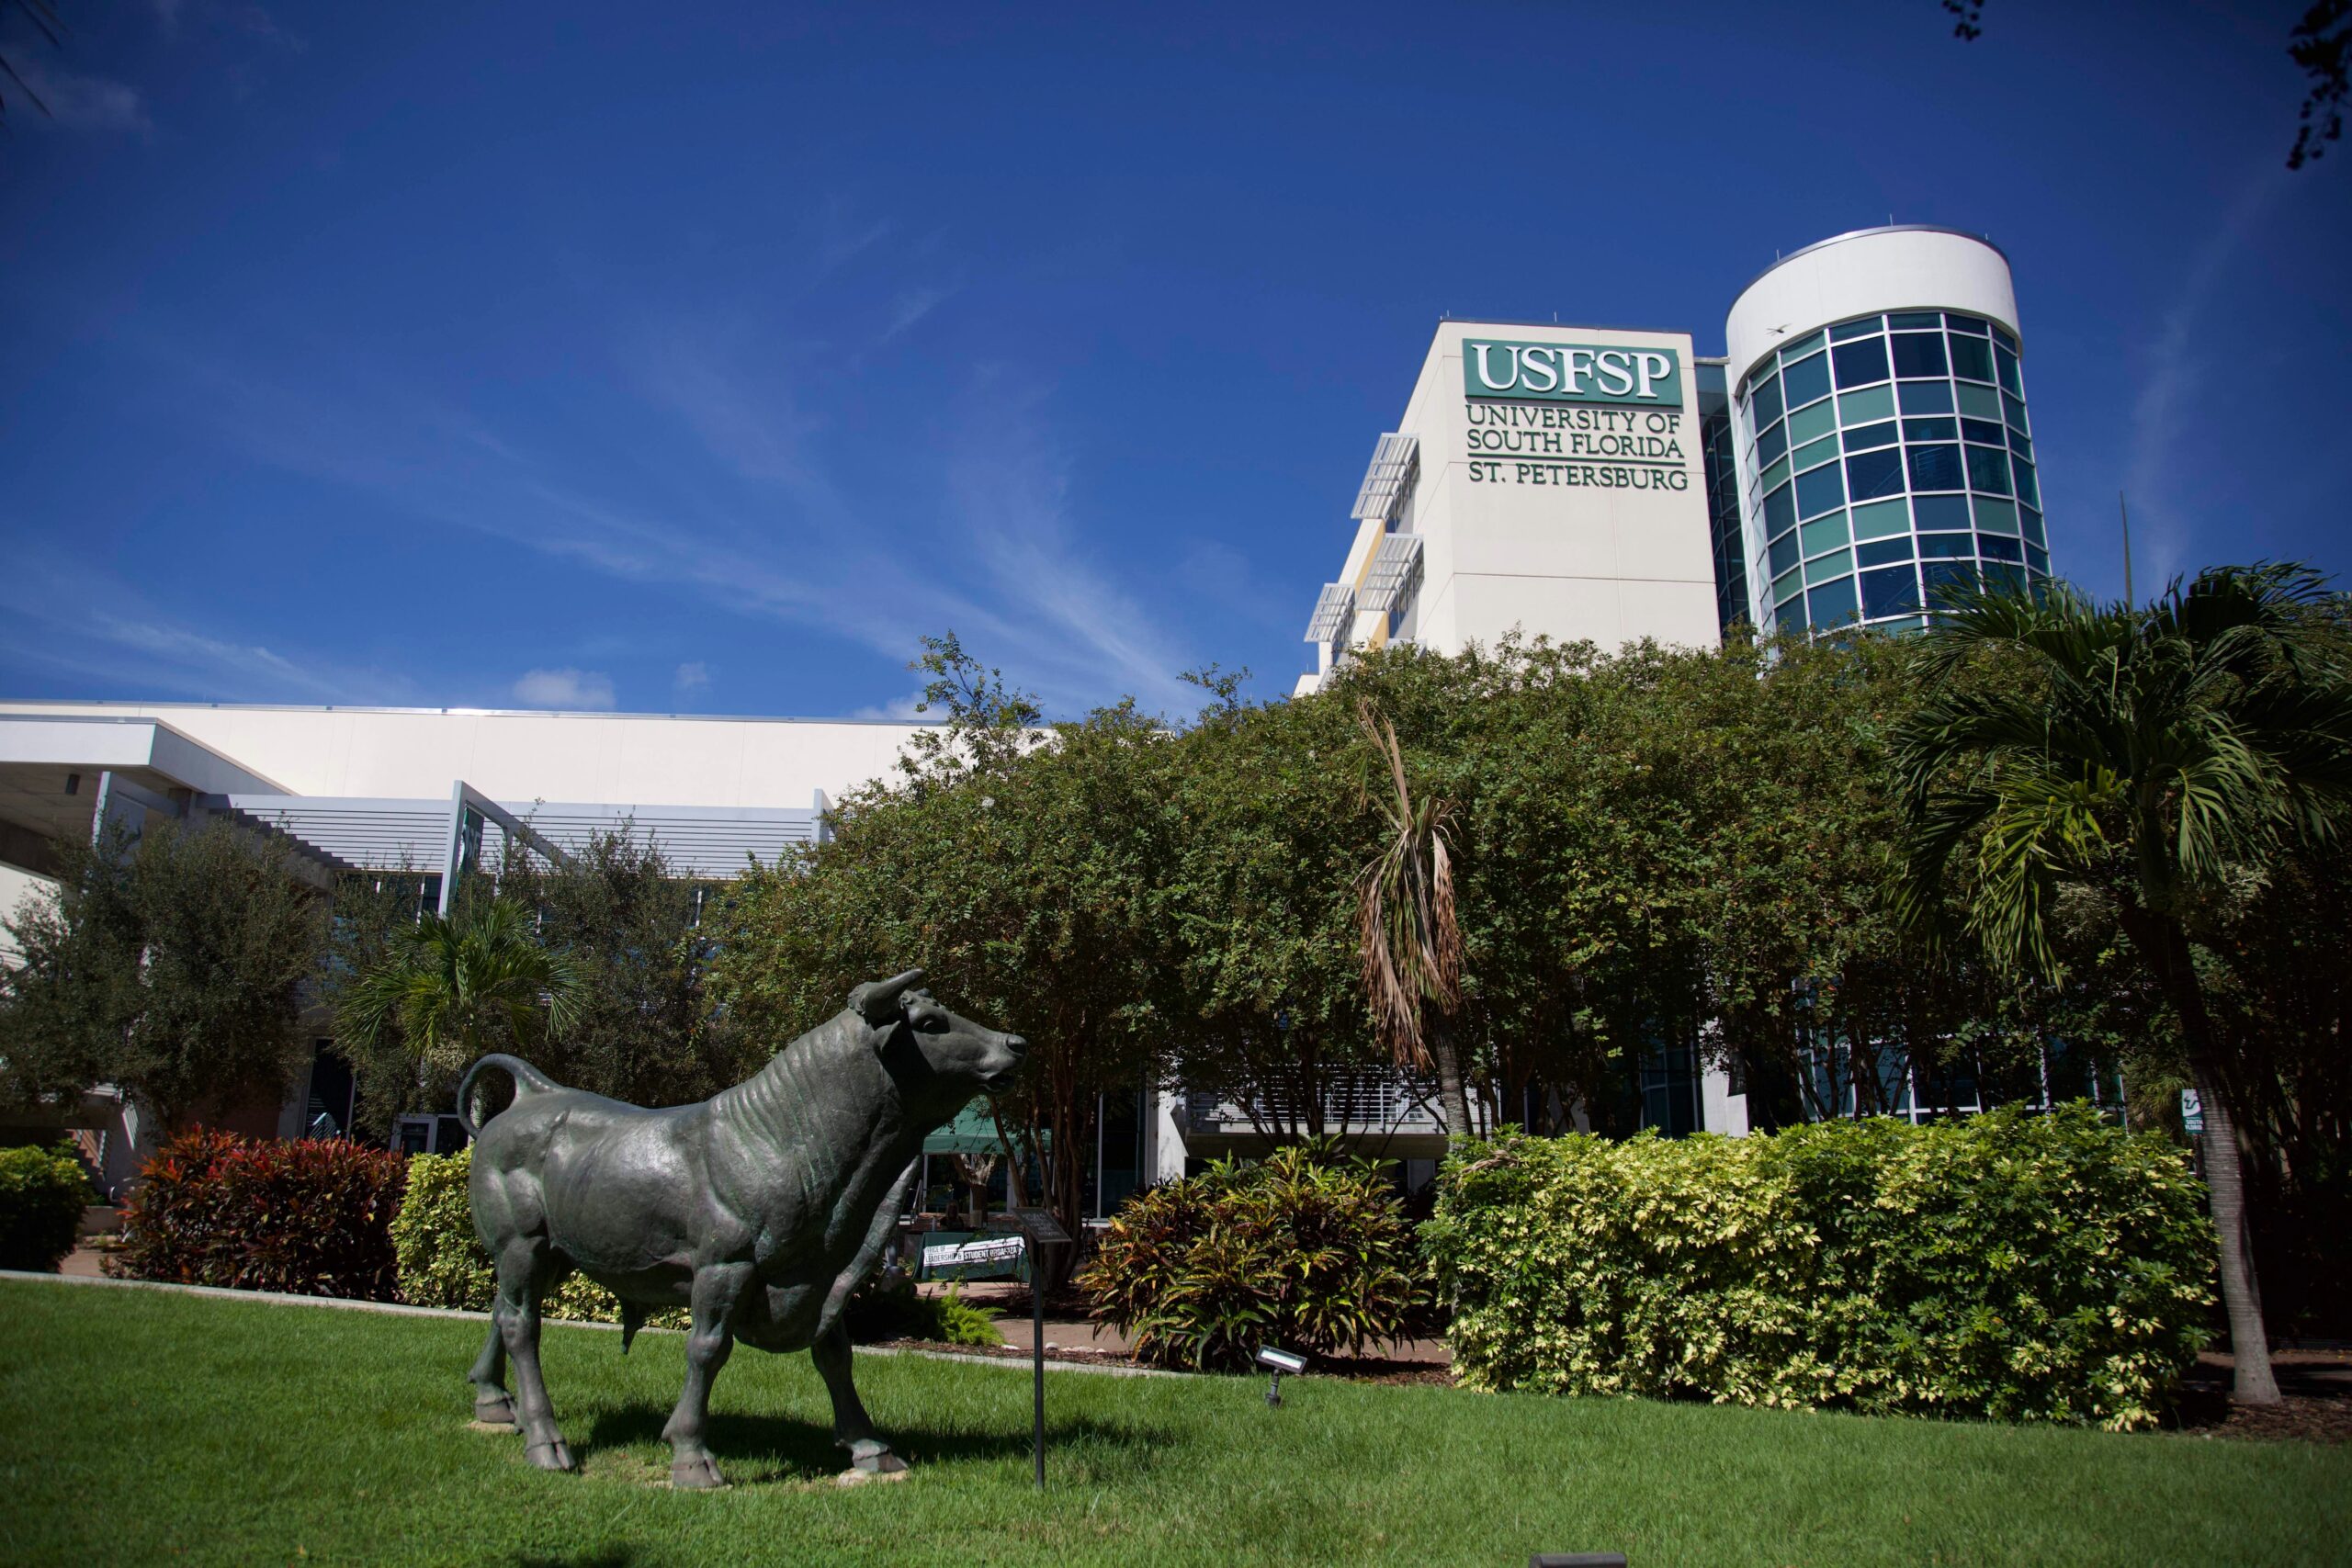 USF to design new Climate Action Plan focused on sustainability